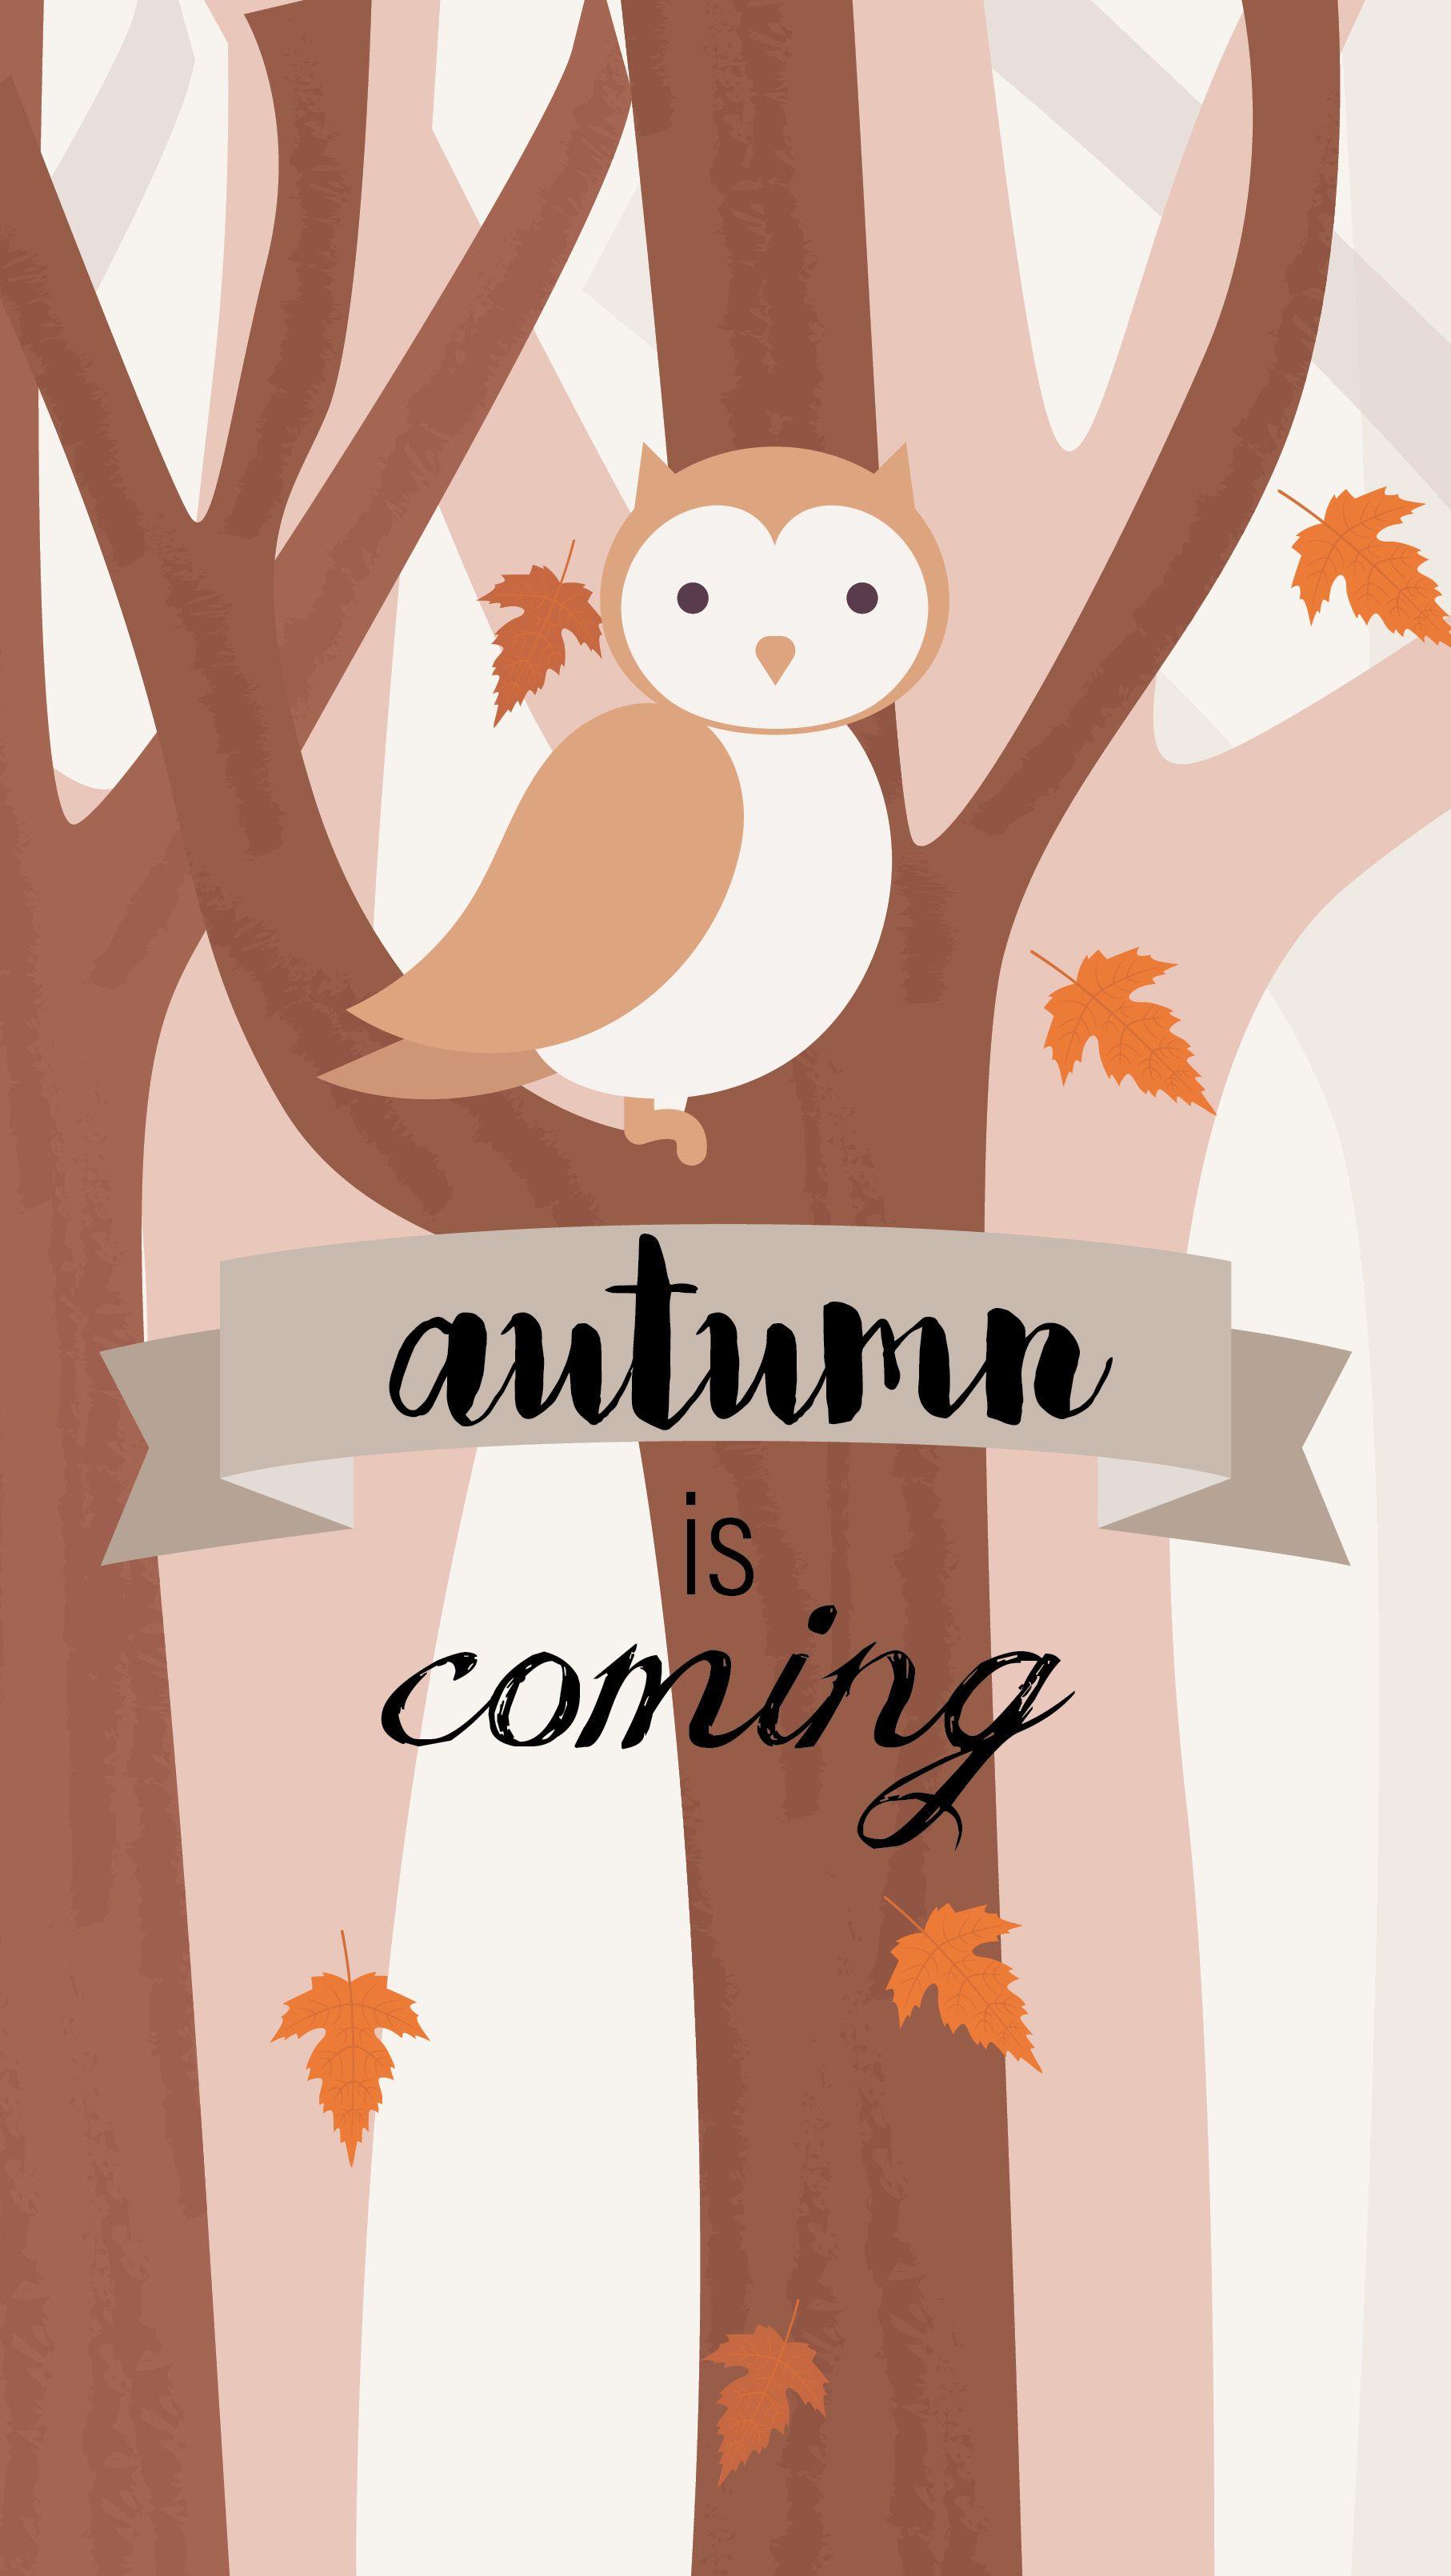 Autumn is coming #fall #autumn. Autumn is the Air in 2019